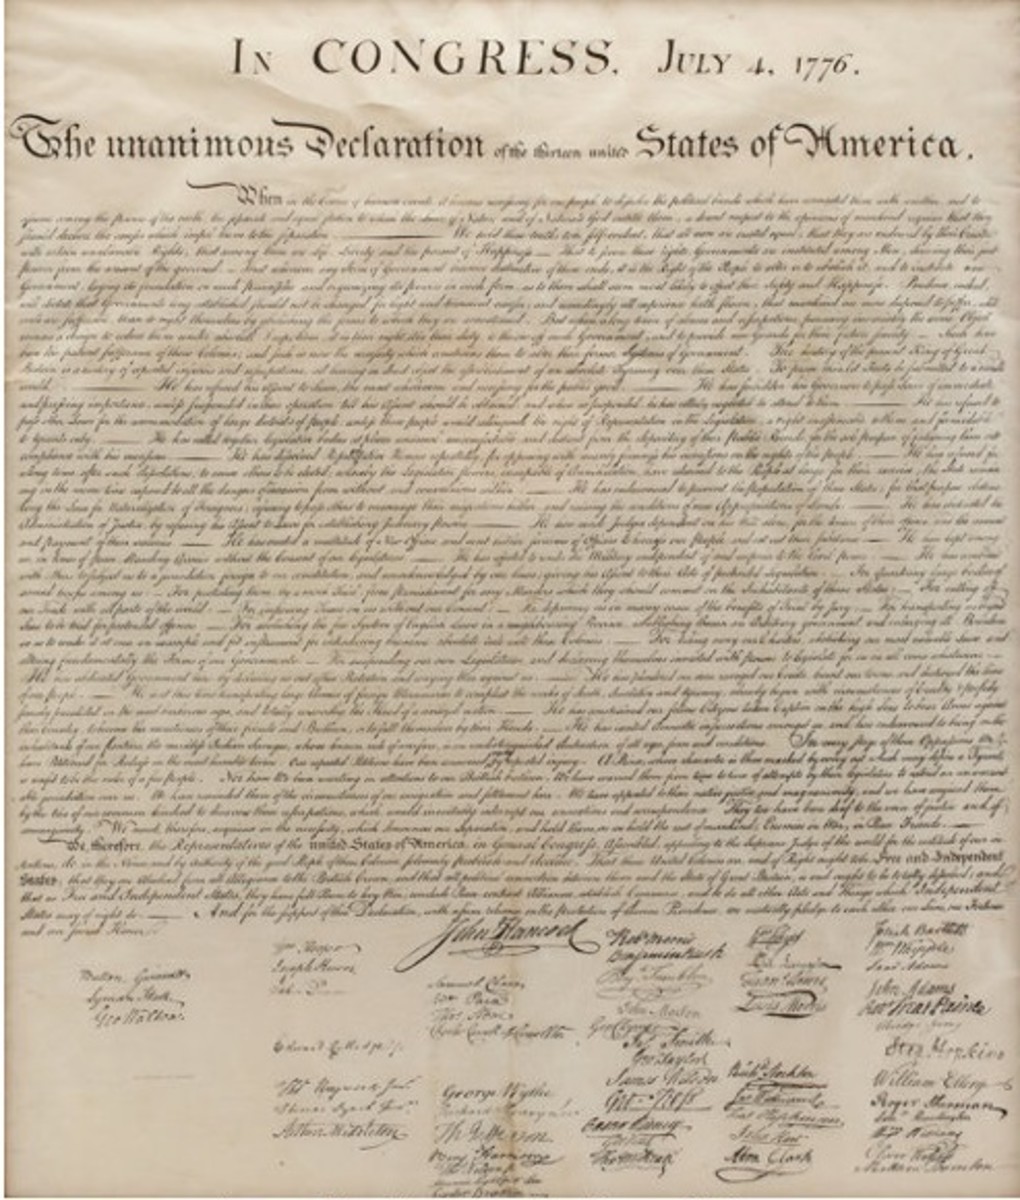 The Declaration of Independence with signatures of the delegates.